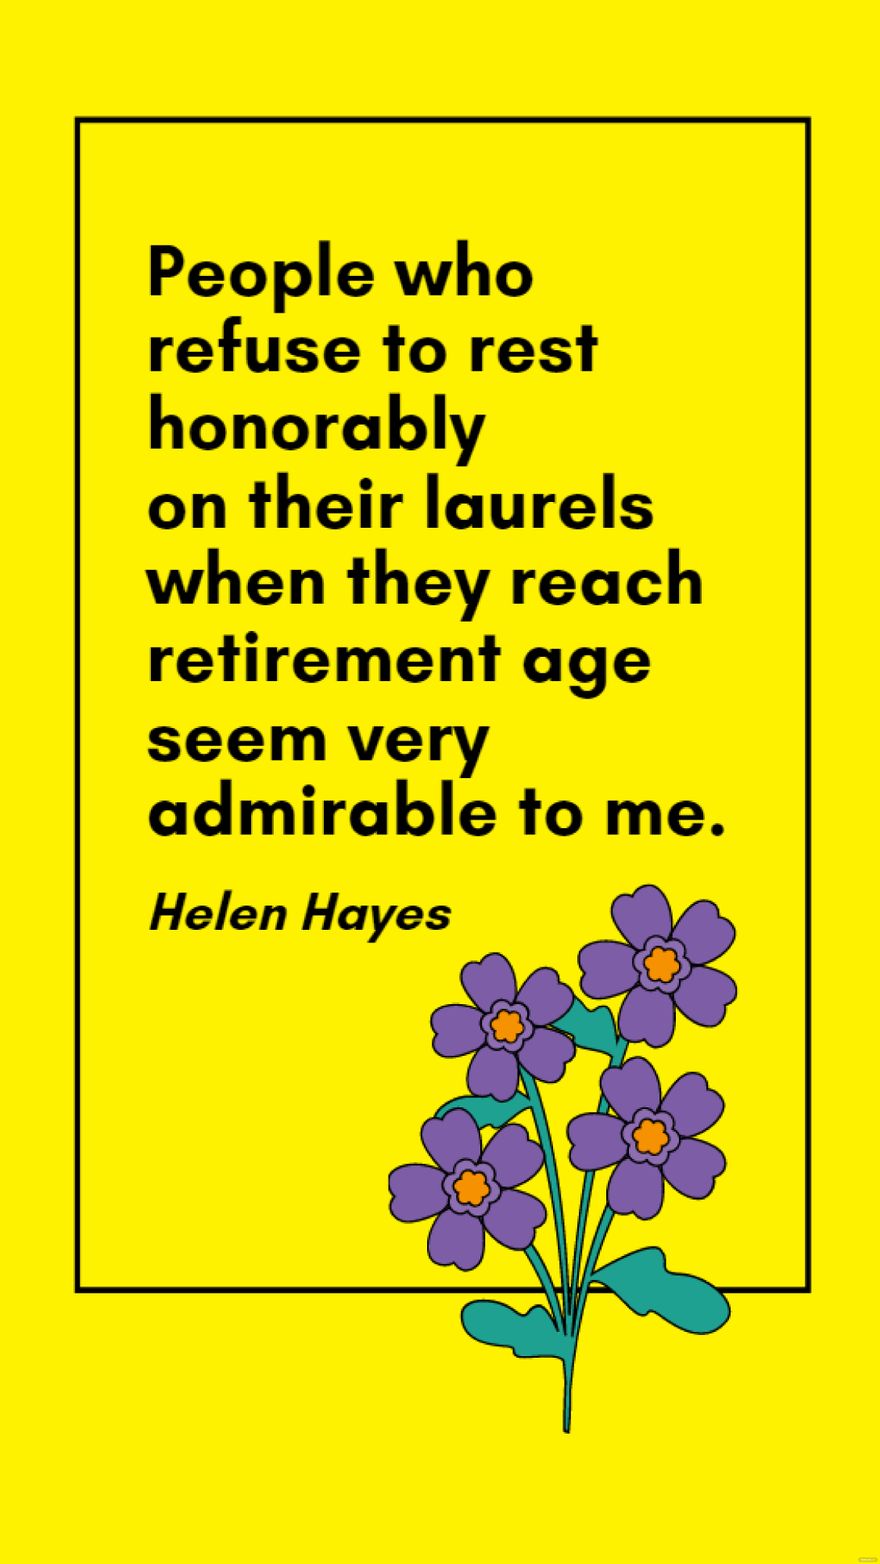 Helen Hayes - People who refuse to rest honorably on their laurels when they reach retirement age seem very admirable to me. in JPG